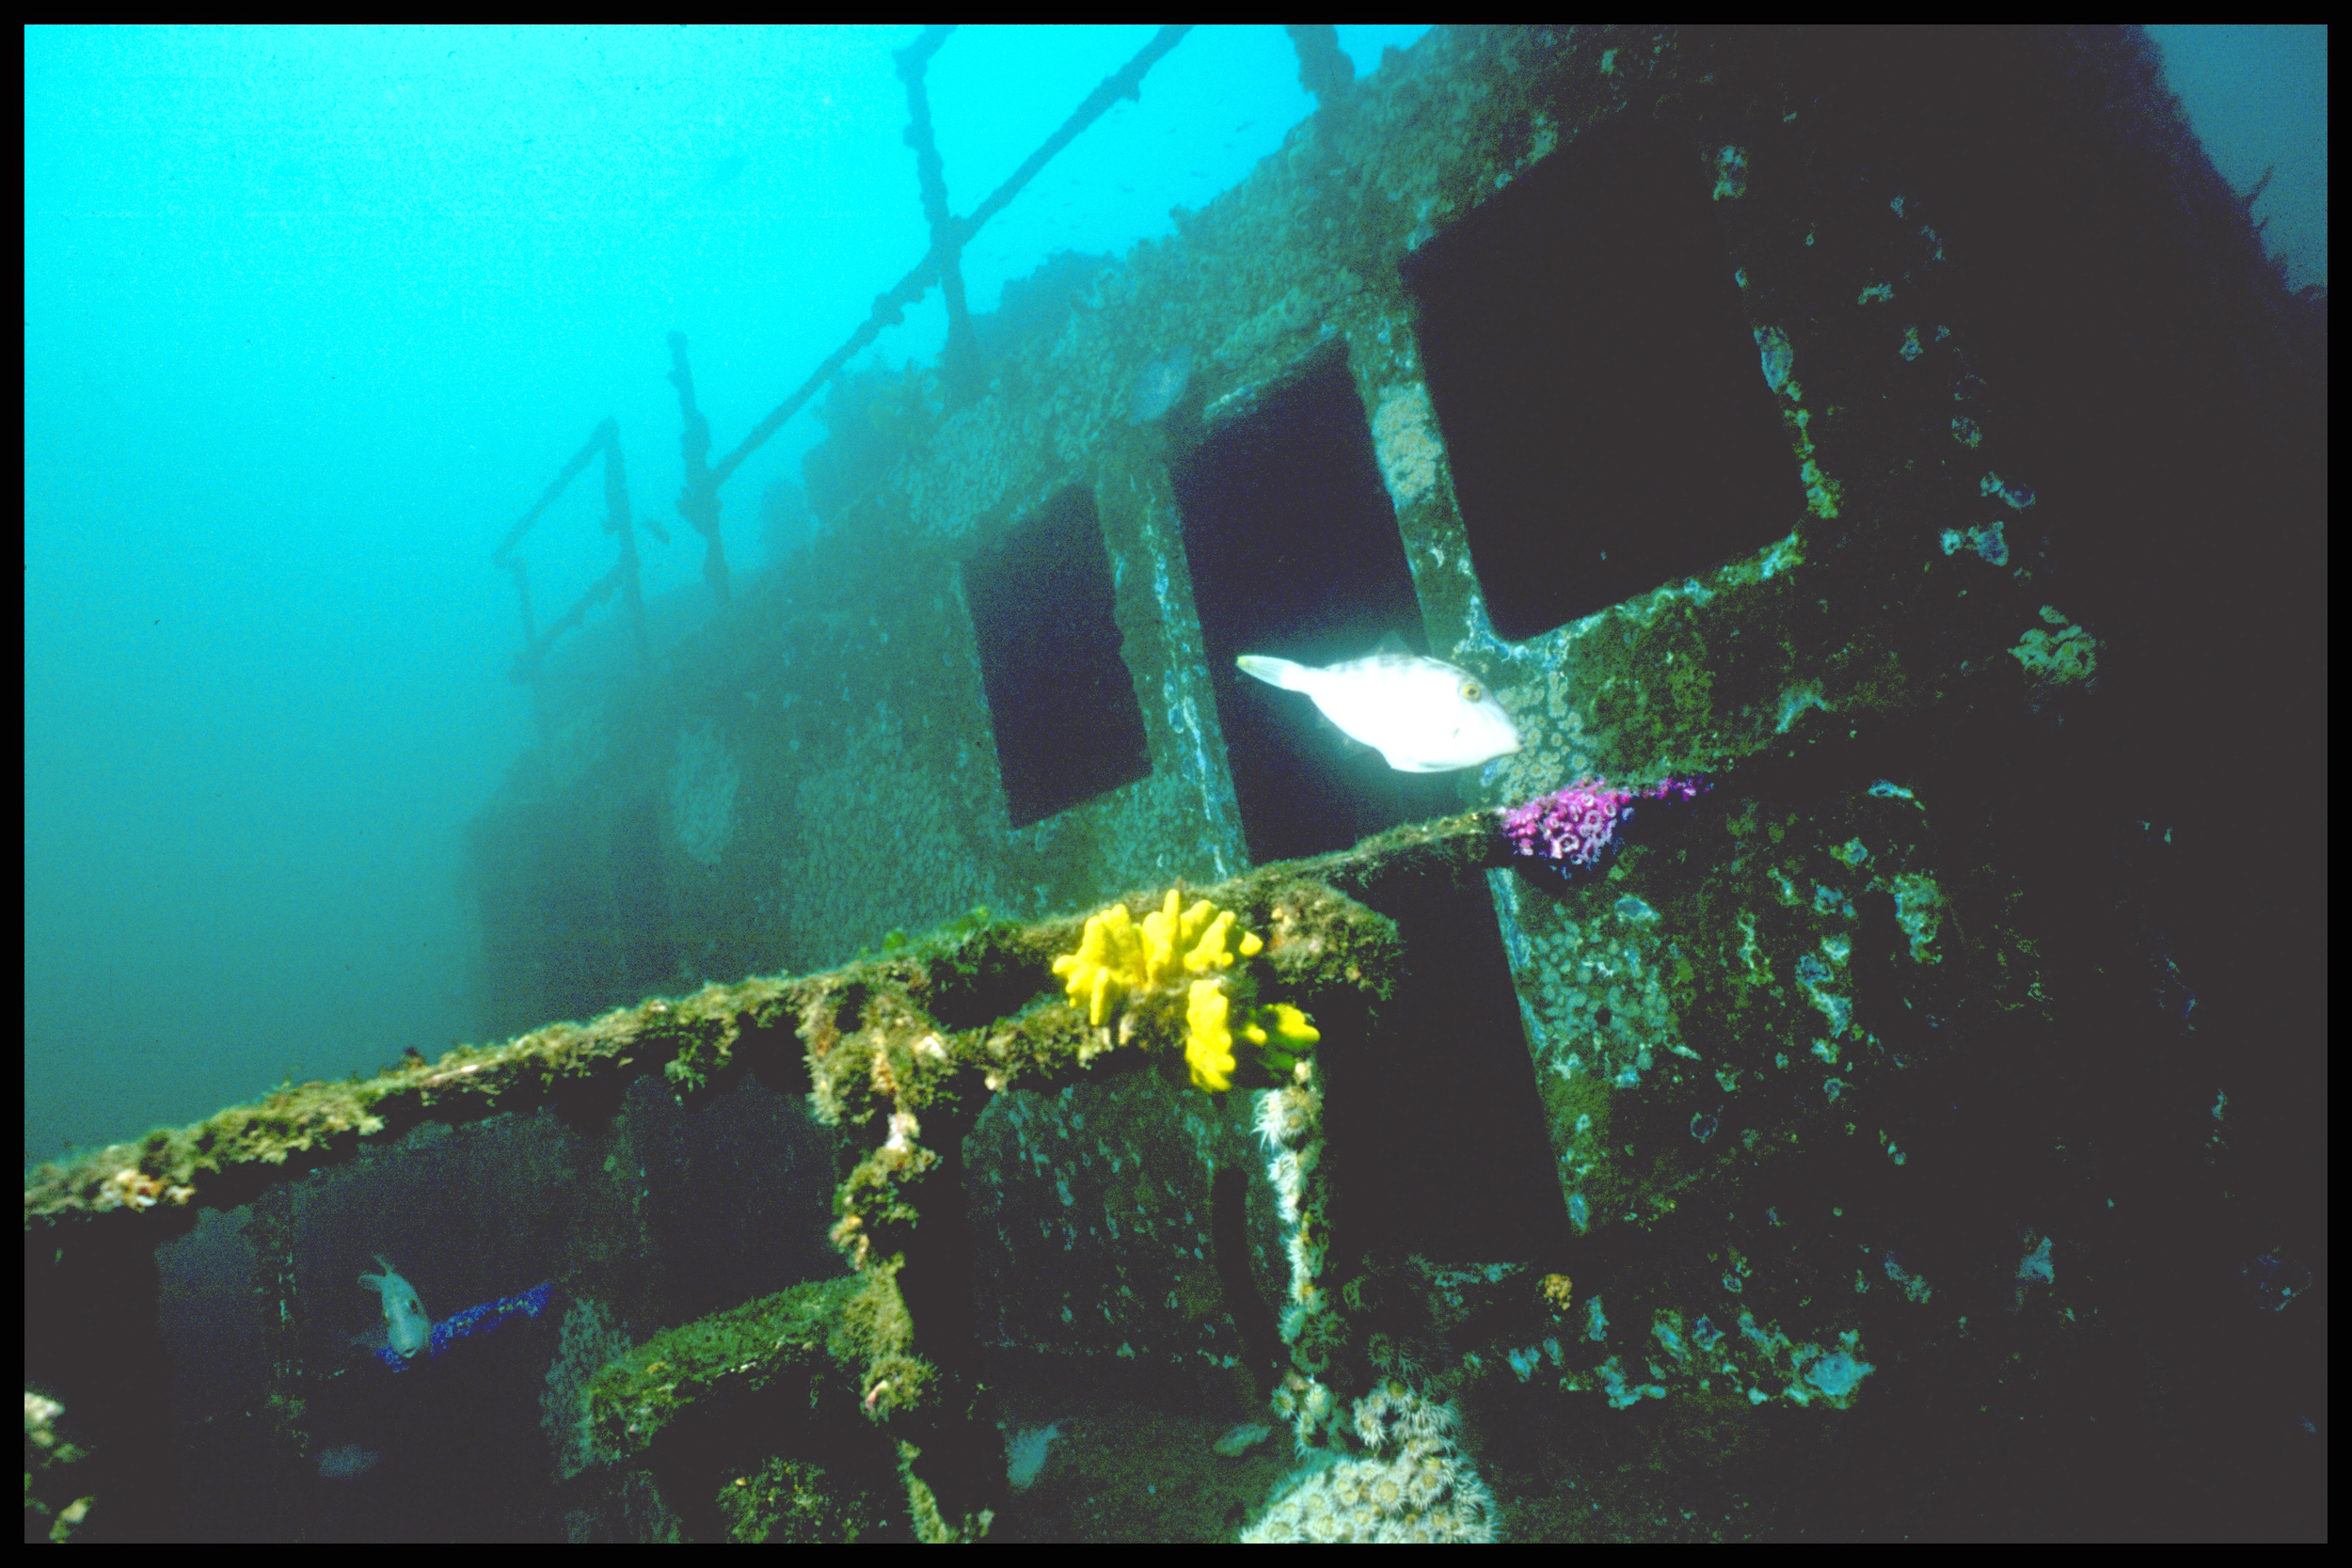 The wreck of the Rainbow Warrior on the seabed. The rails are crusted with coral and seaweed, and fish swim nearby.